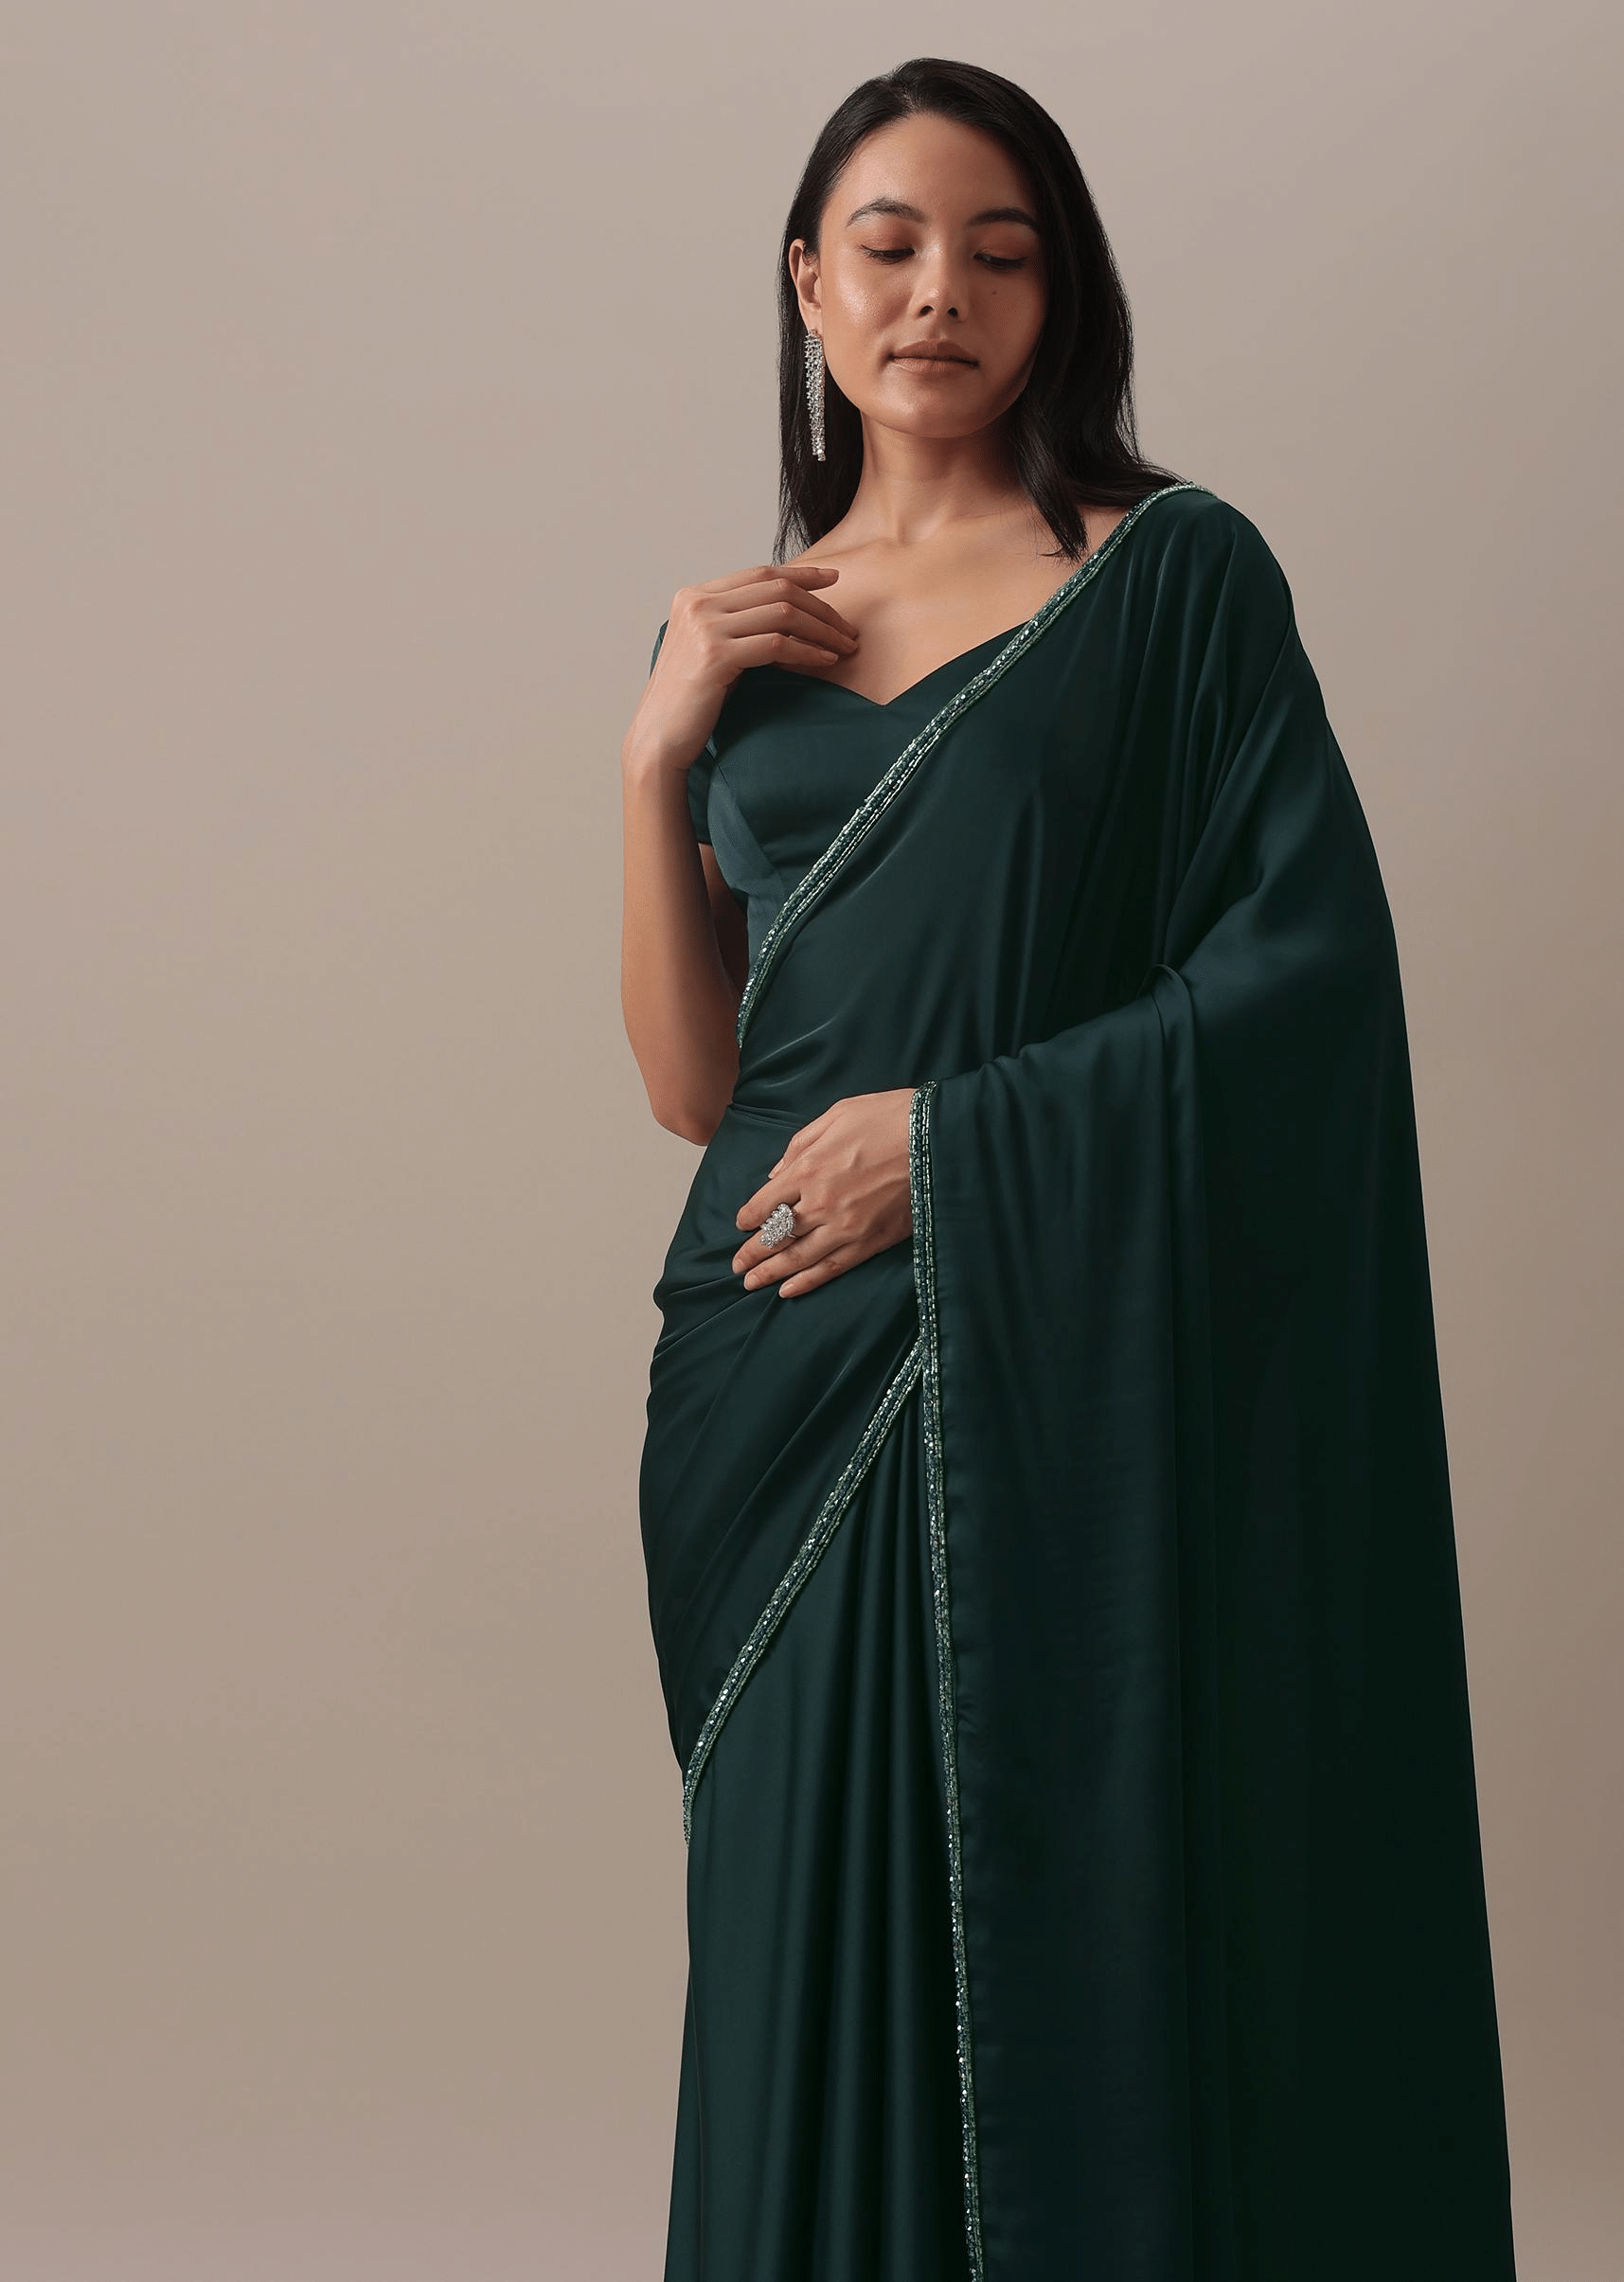 Buy Teal Green Plain Saree And Stitched Blouse With Cut Dana Lace In Satin